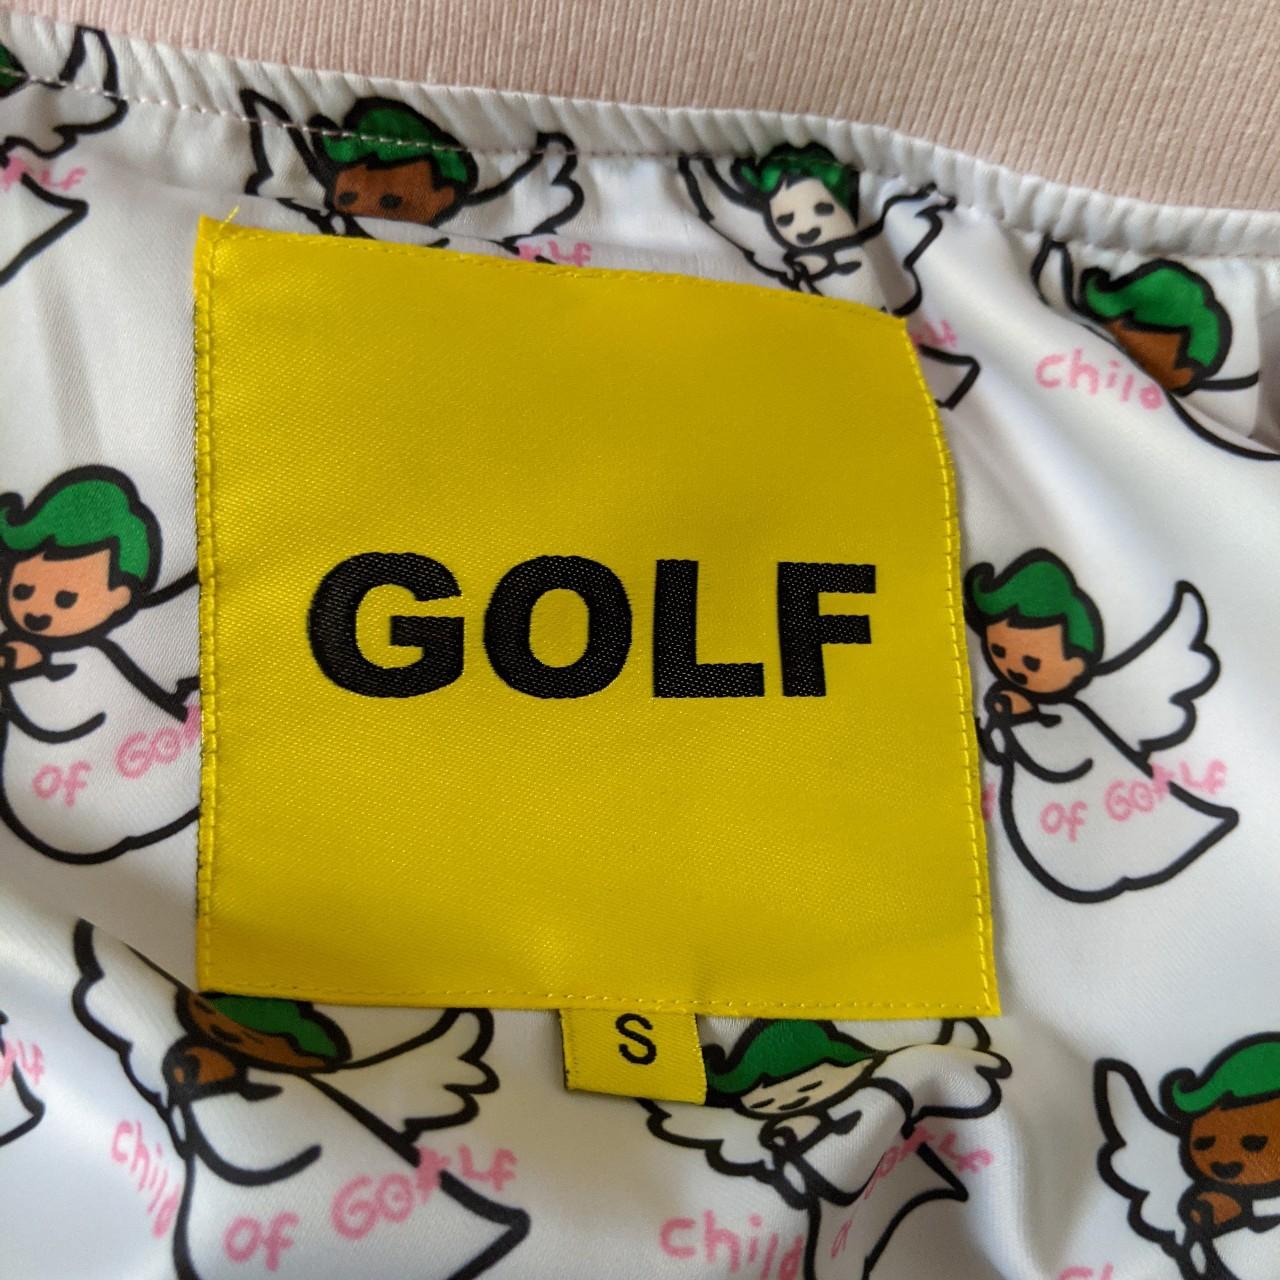 Golf Wang Child of Golf bomber jacket in pink, size... - Depop